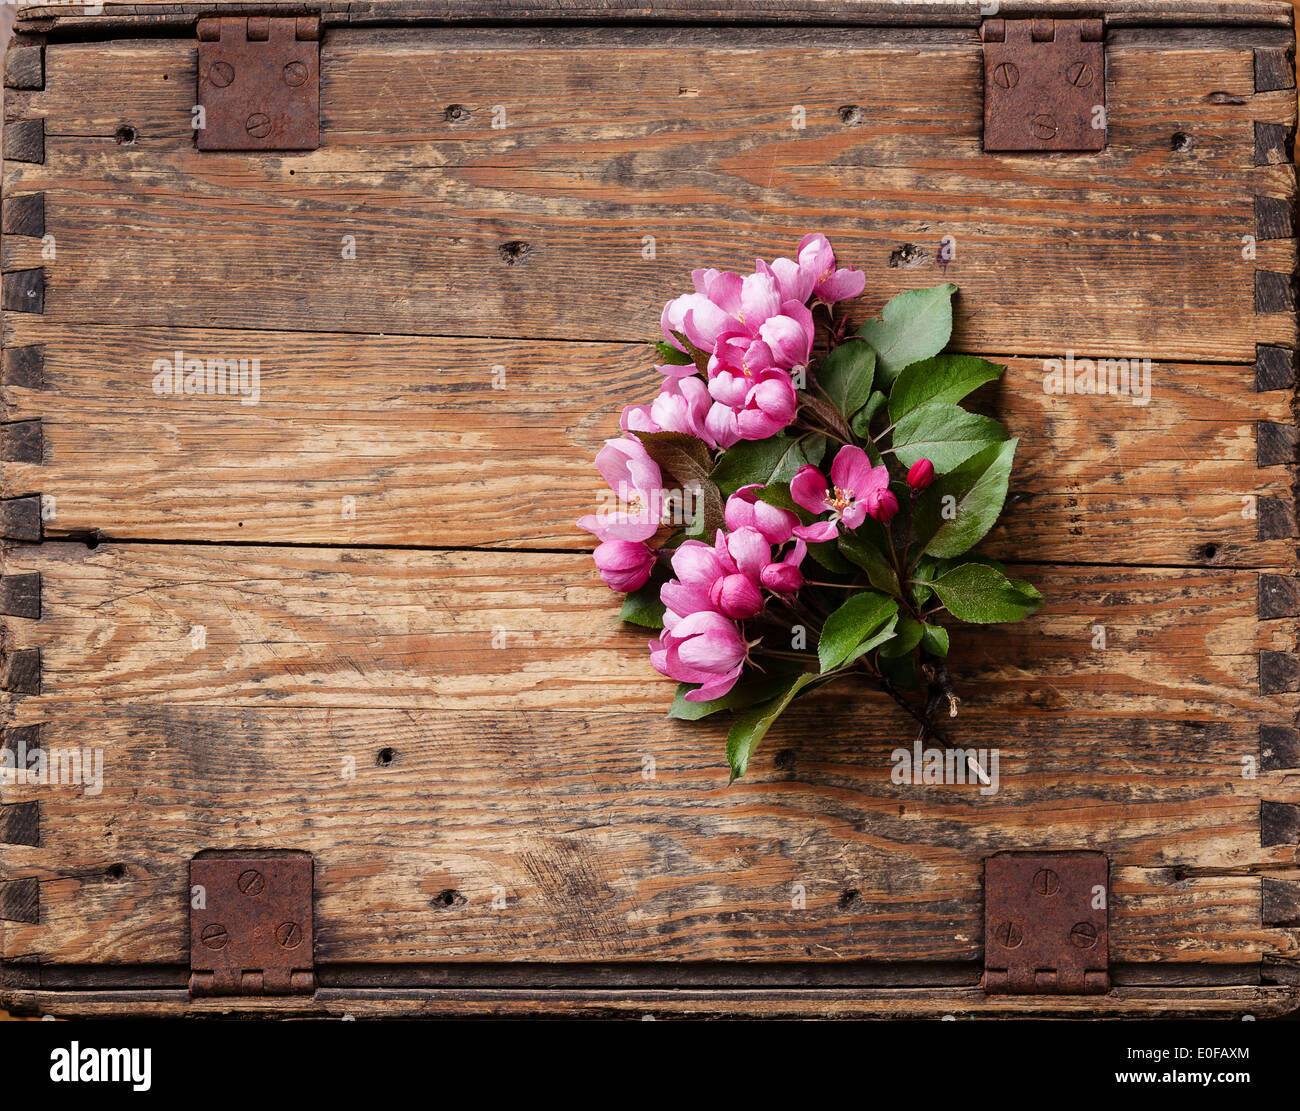 Blossoming branch of Pink apple tree on wooden background Stock Photo